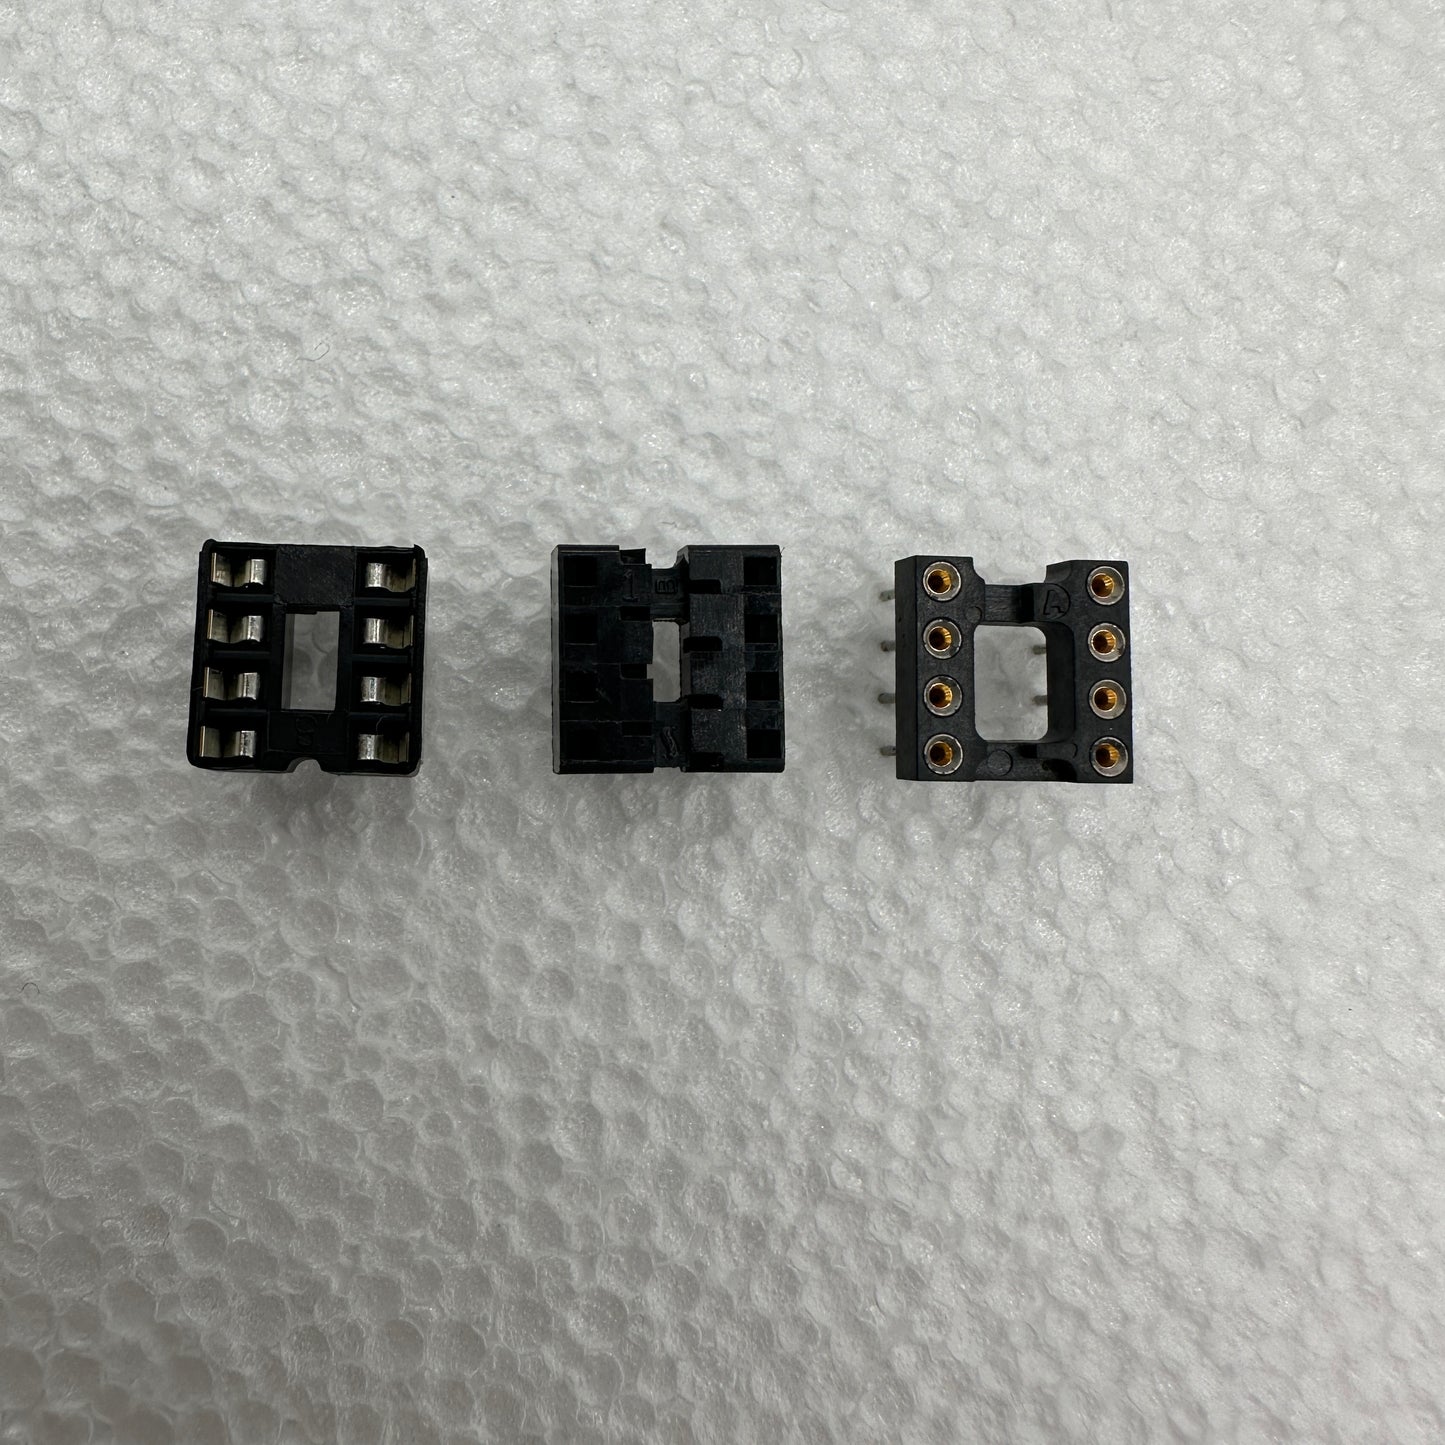 DIP8 8 Pin Op-Amp IC Socket (with Options)